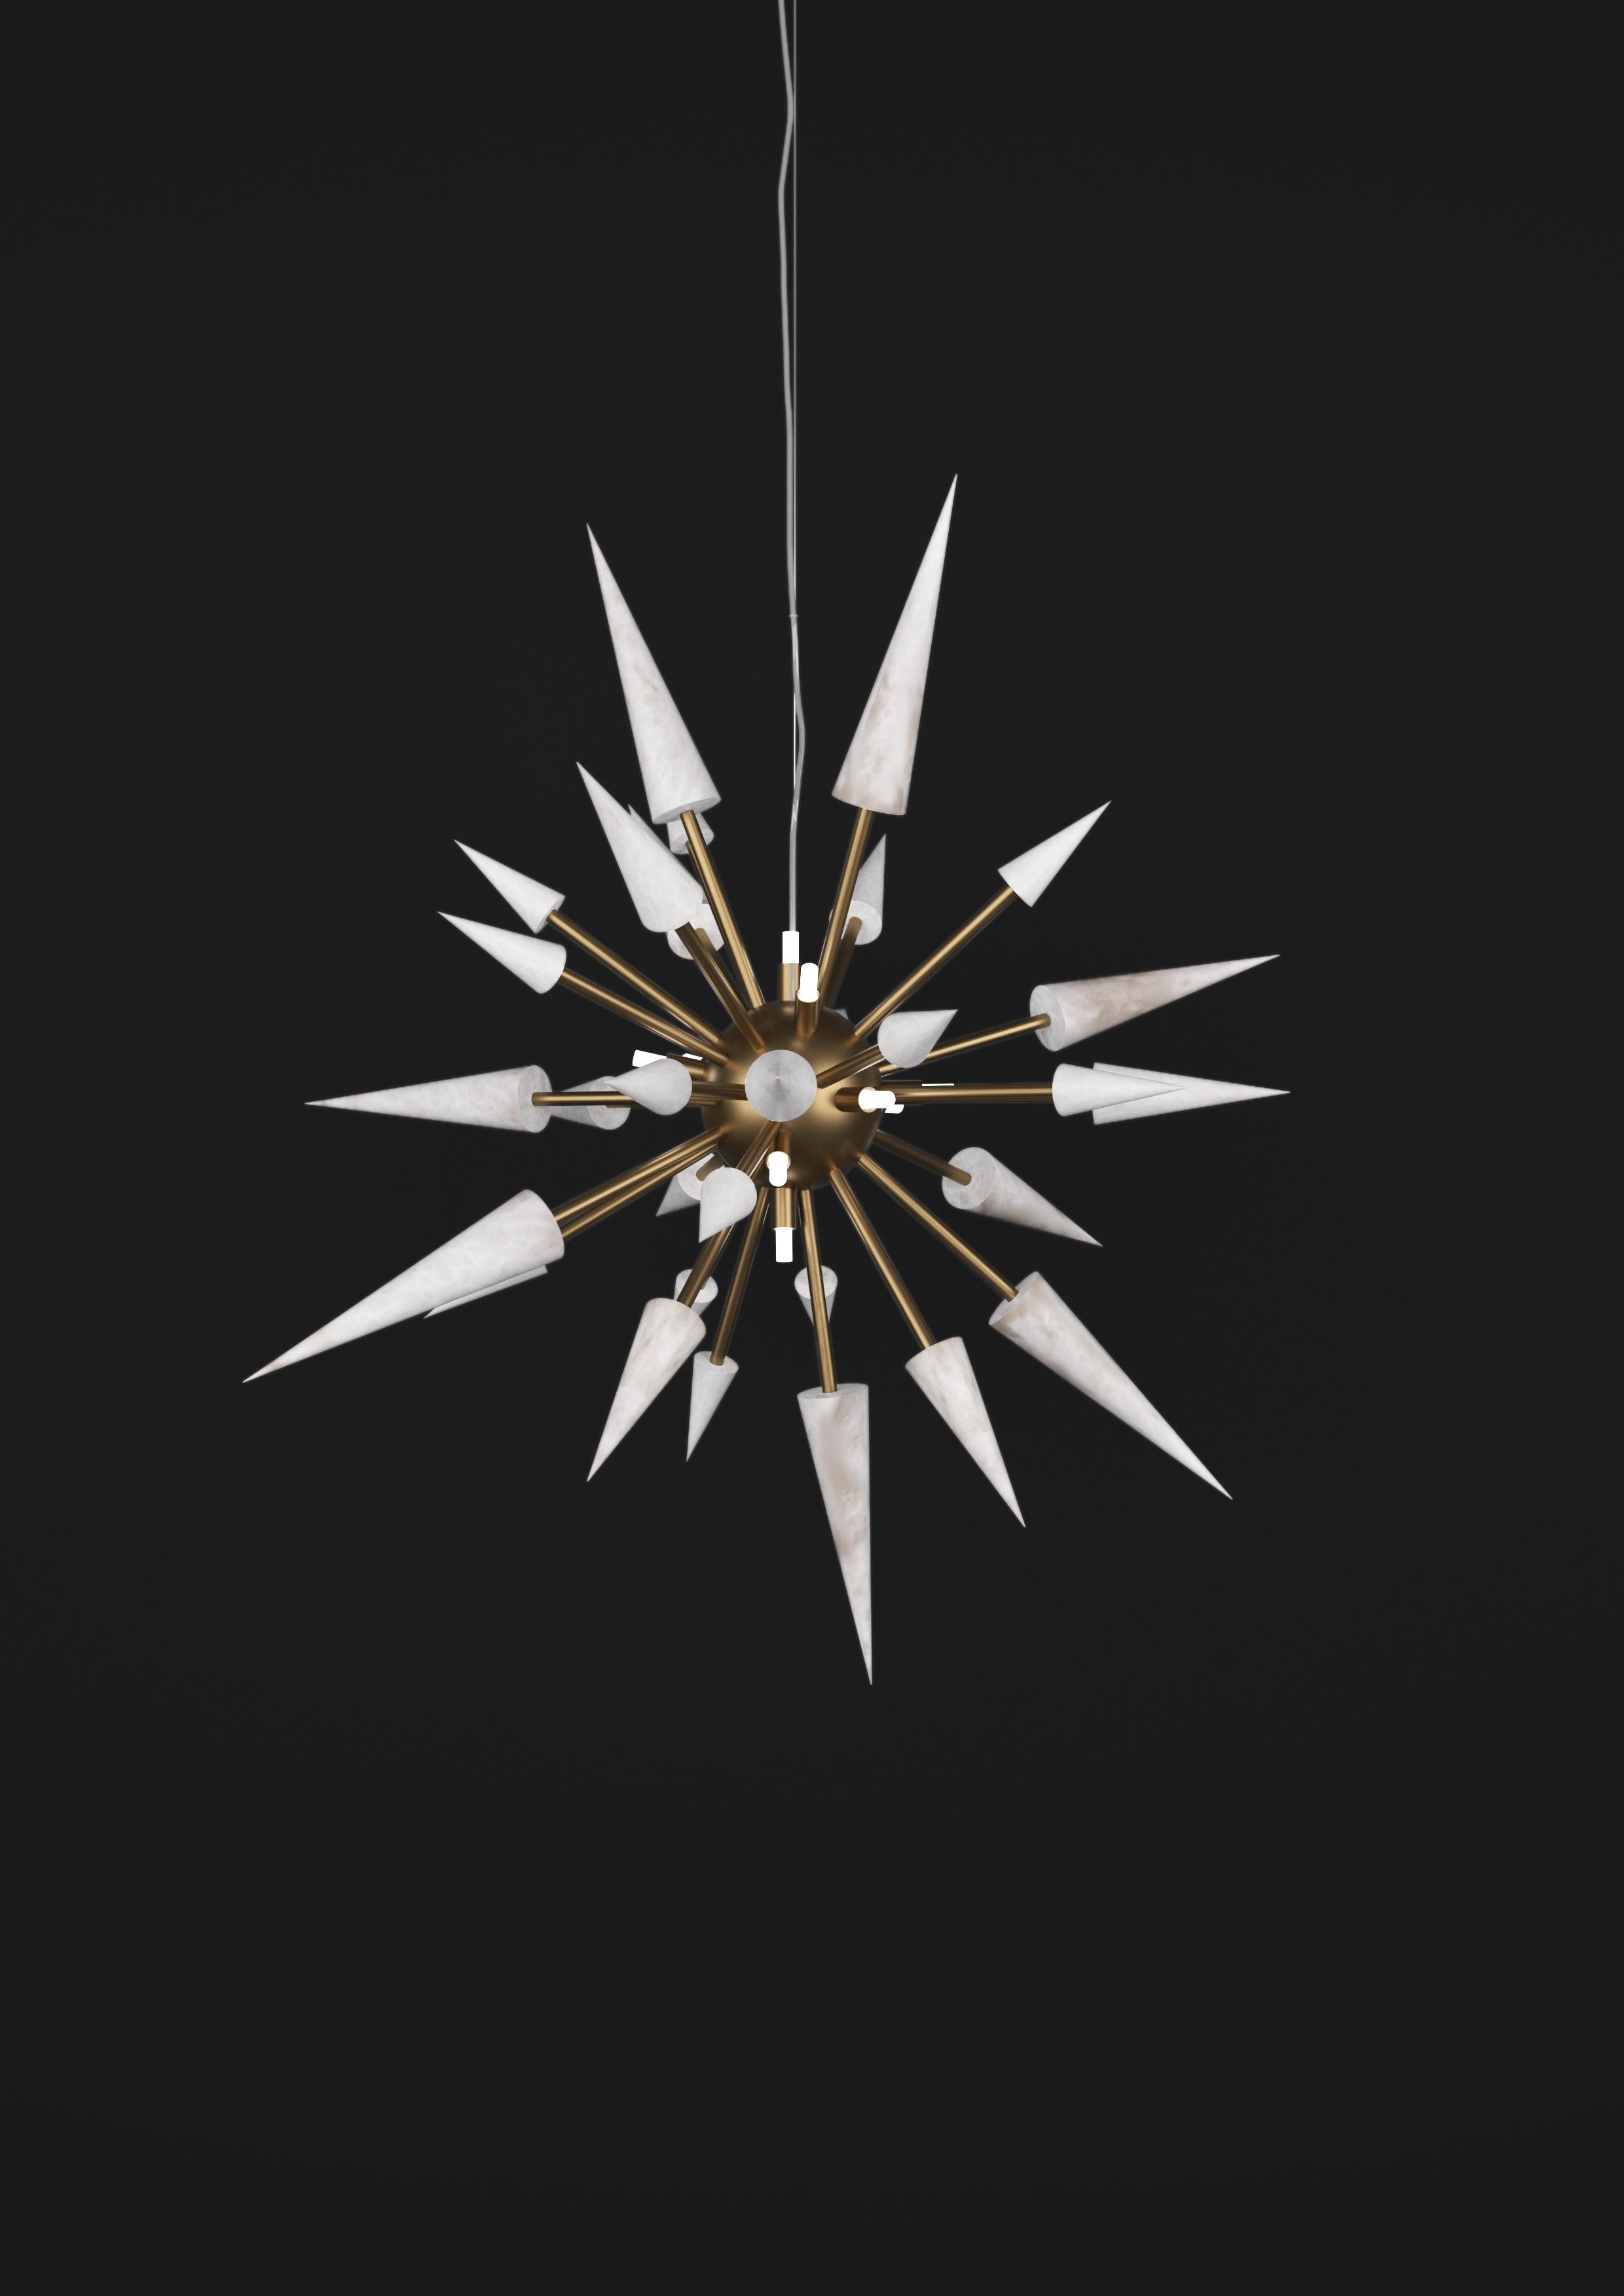 Perseo 100 Bronze Pendant Lamp by Alabastro Italiano
Dimensions: Ø 100 x H 300 cm.
Materials: White alabaster and bronze.

Available in different finishes: Shiny Silver, Bronze, Brushed Brass, Ruggine of Florence, Brushed Burnished, Shiny Gold,